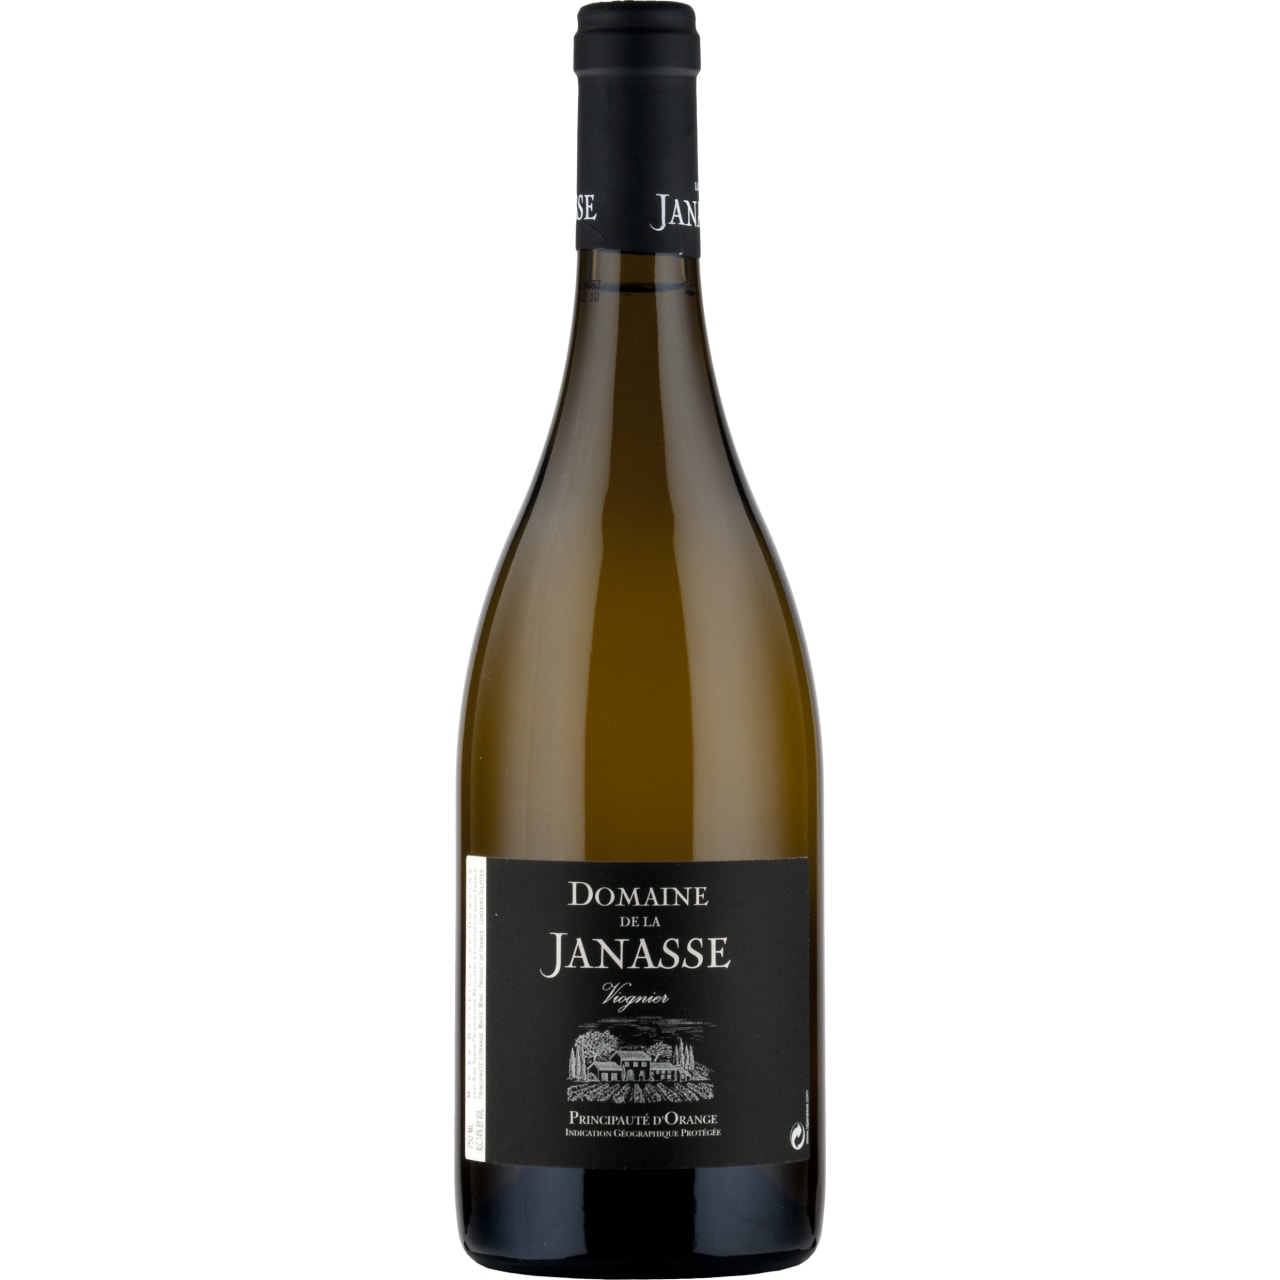 A fresh yet muscular Viognier with all the delicious weight of a classic Southern-Rhone white. Fresh stone-fruit flavours and a lovely honeyed finish.